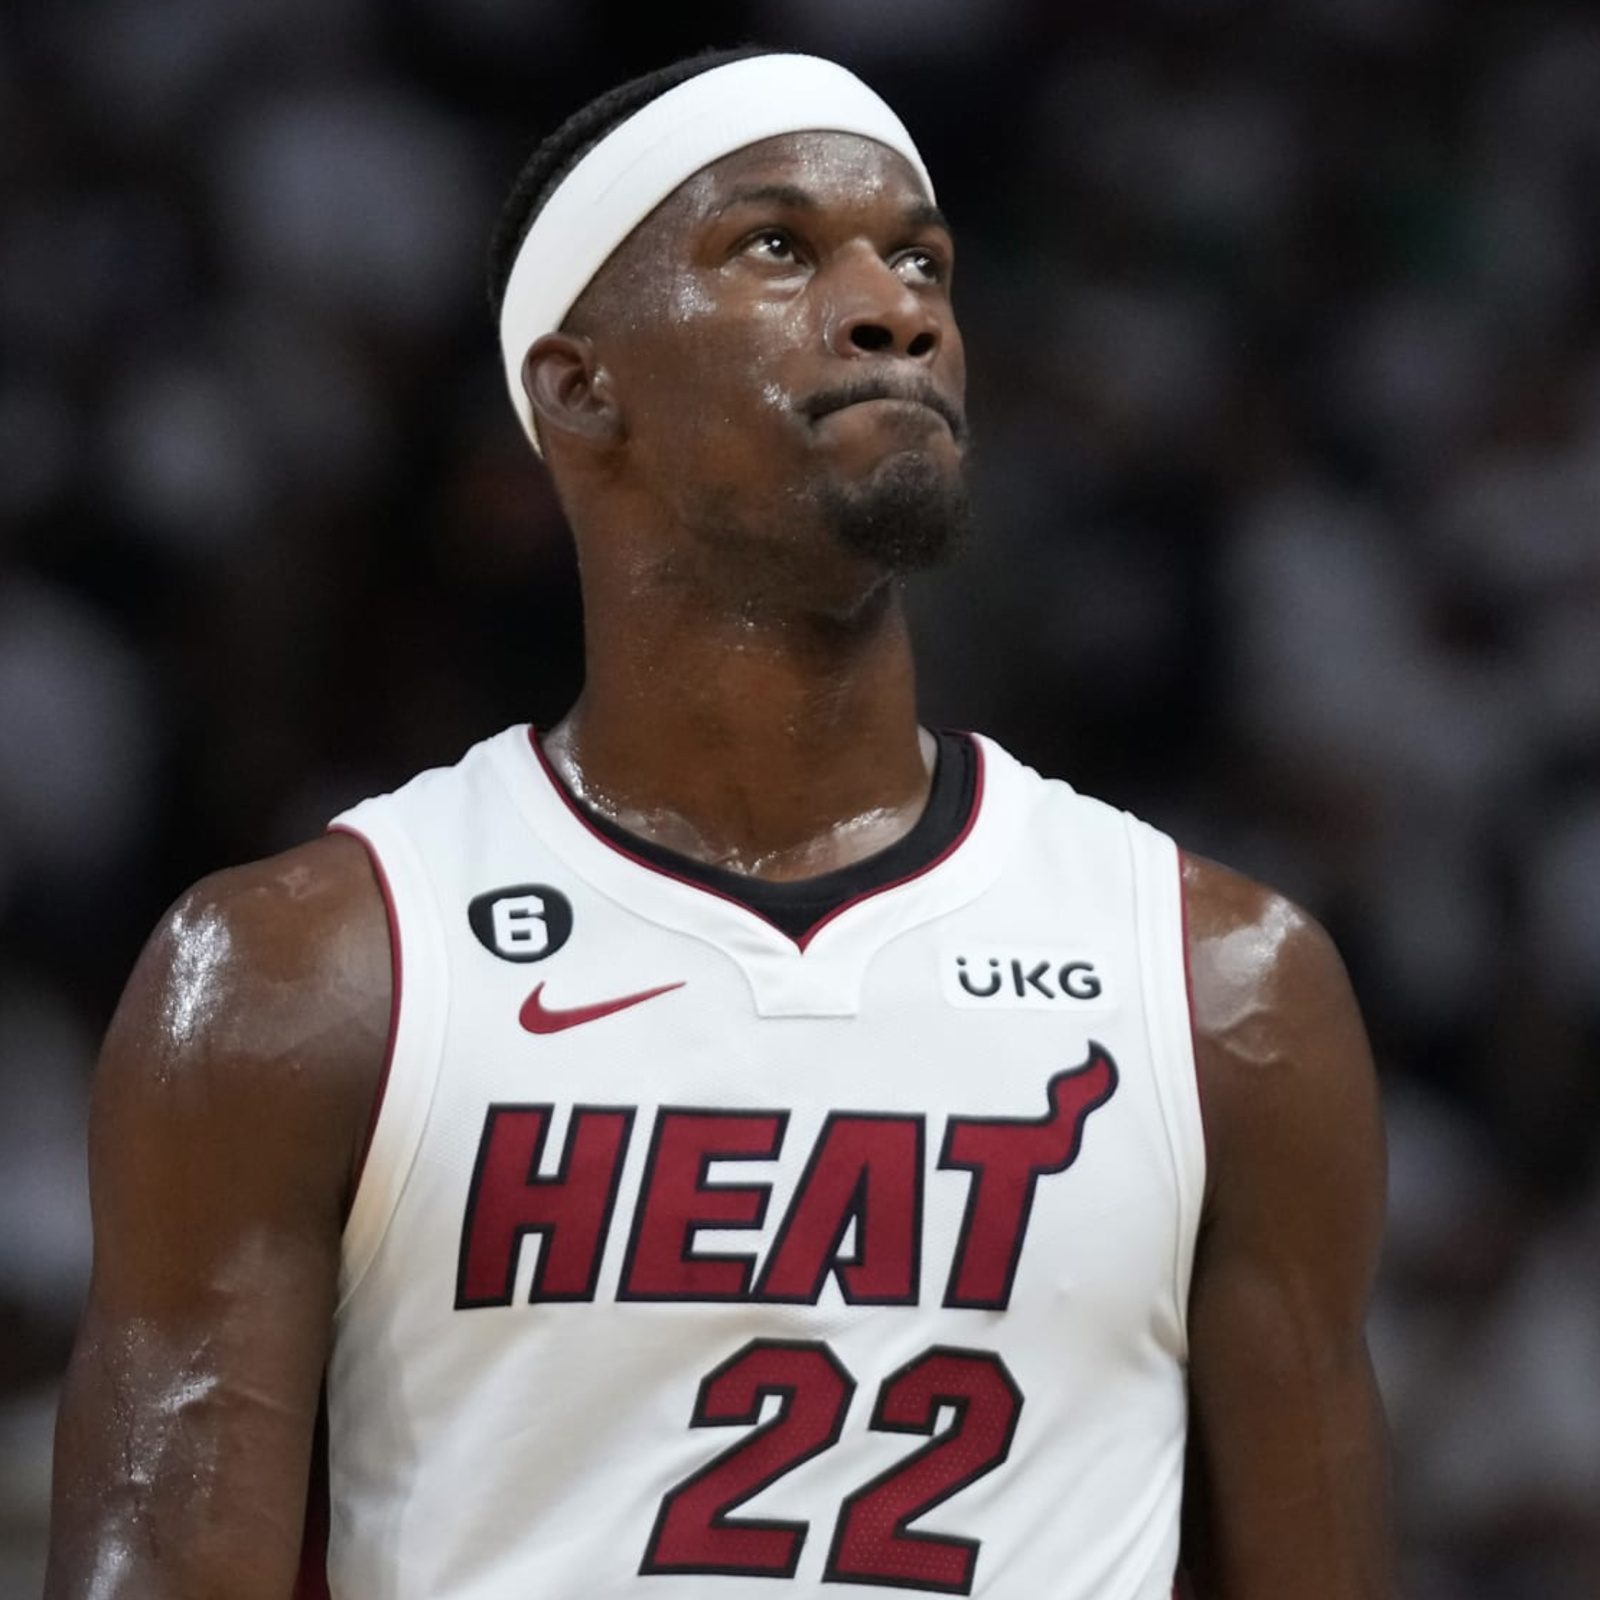 From 0 to 99: Each Miami Heat player shares the story behind his